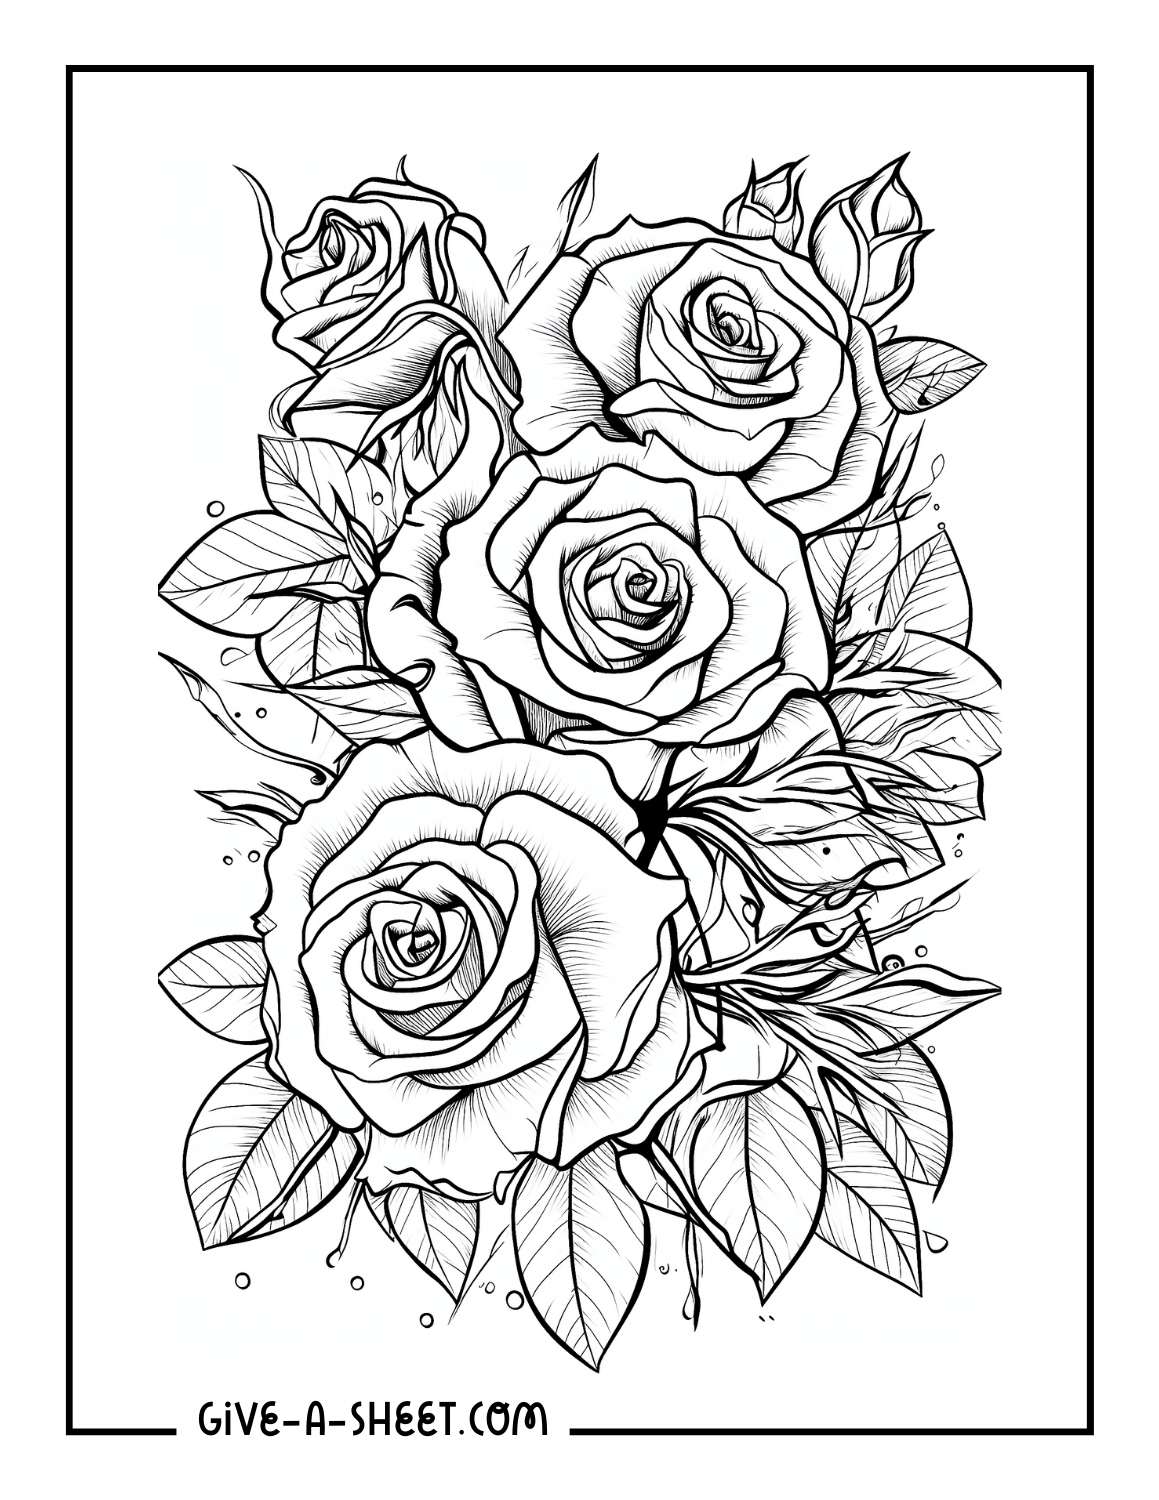 Detailed roses tattoo coloring sheet.